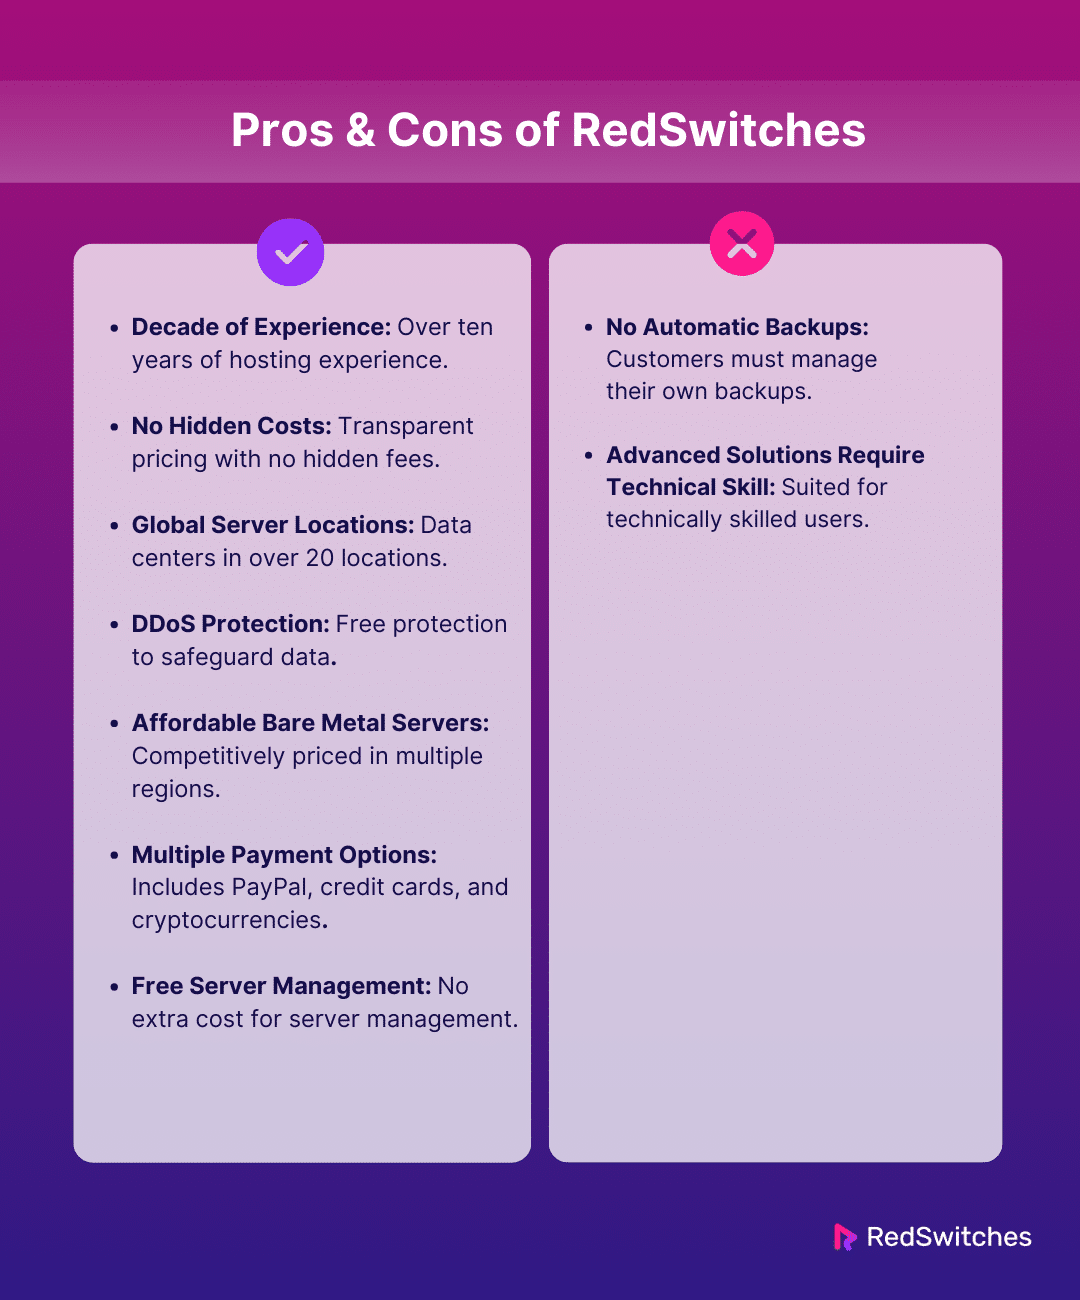 Pros & Cons of RedSwitches